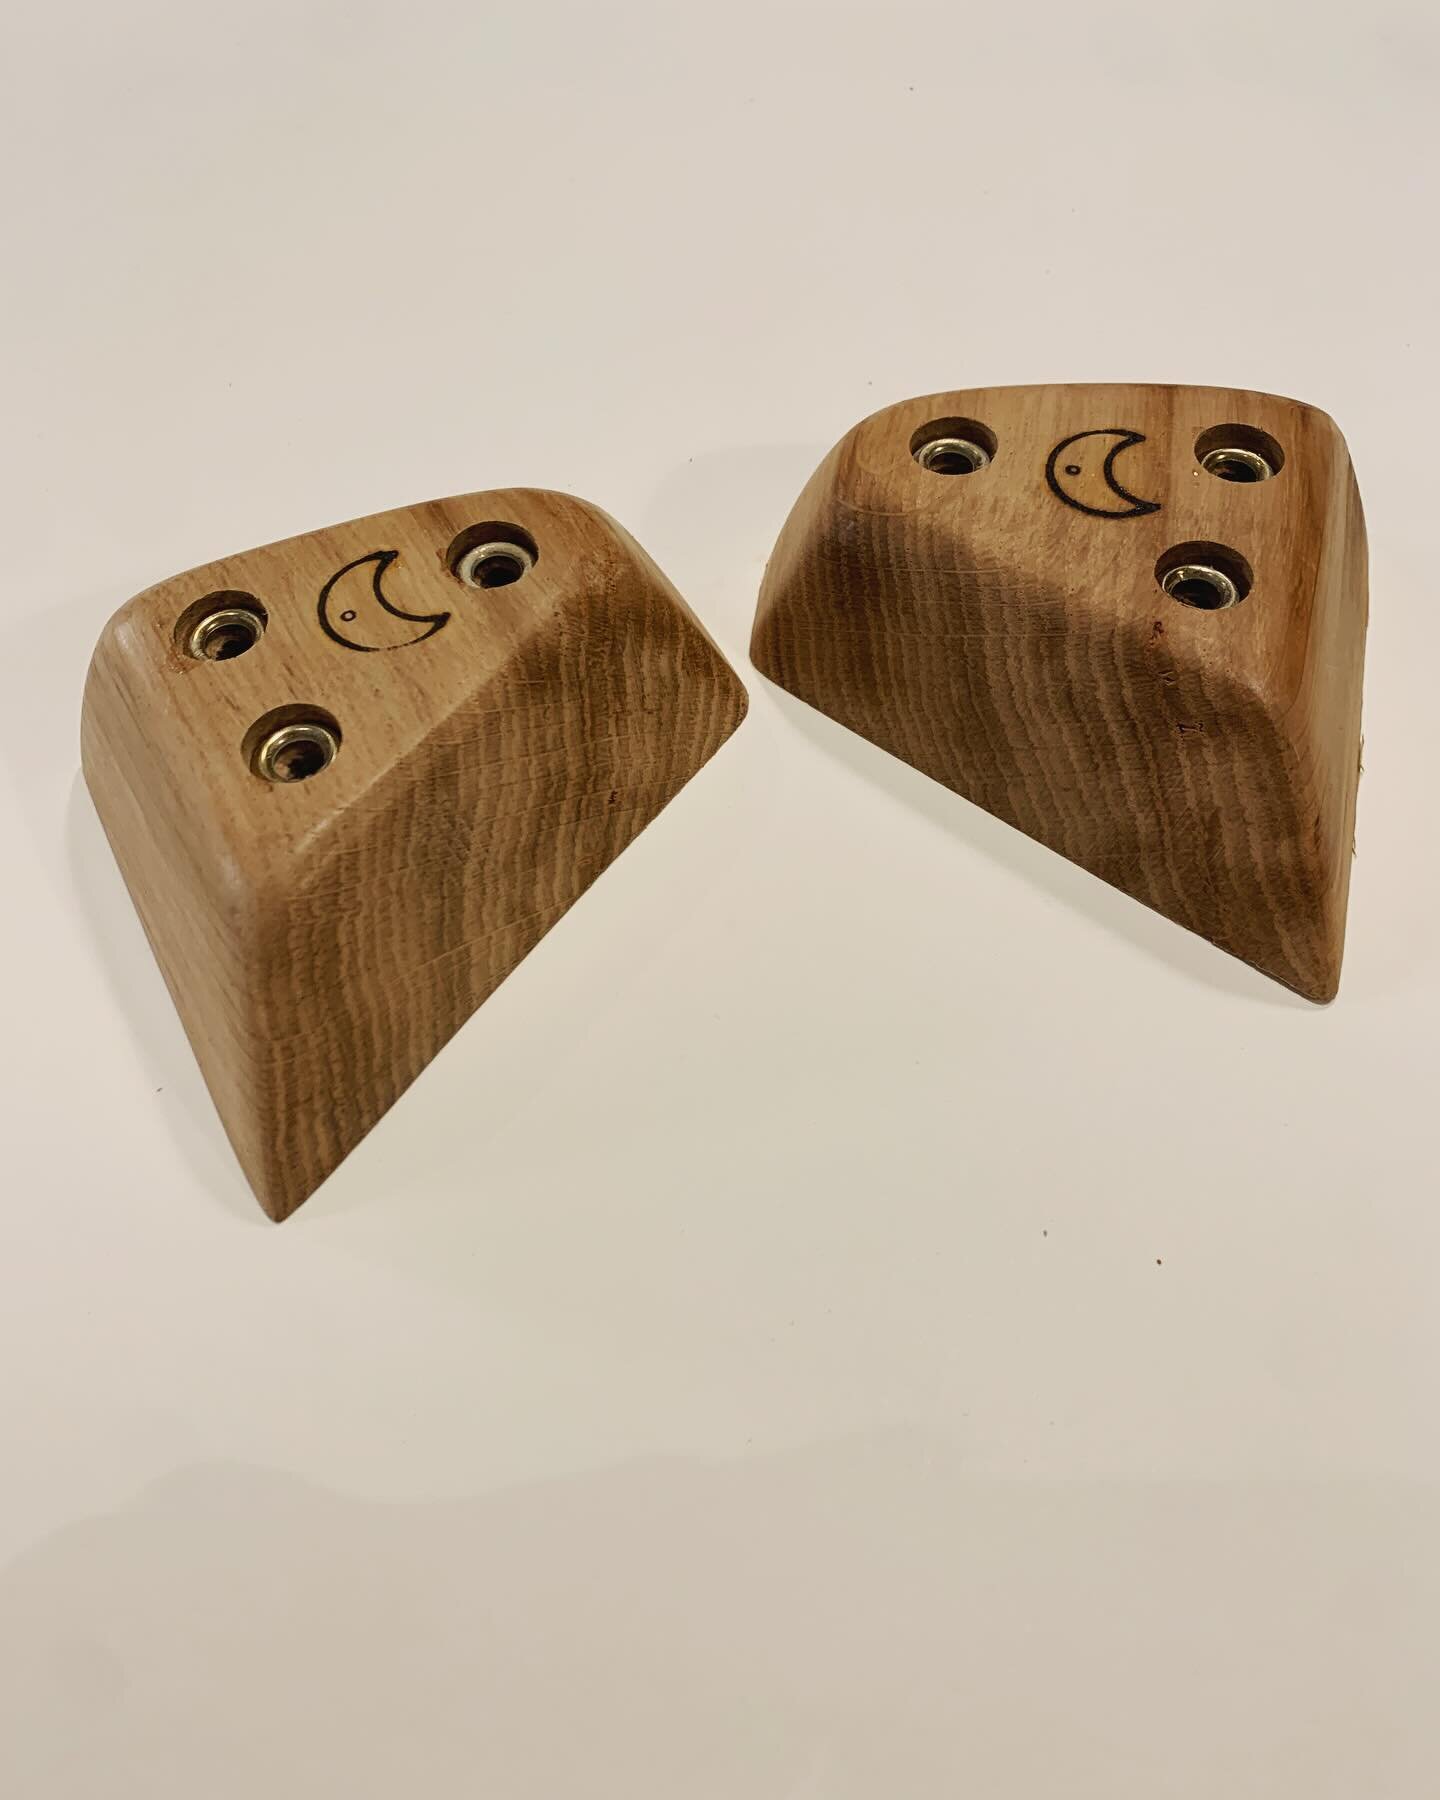 I really like angular holds and how they feel in the hand, this pair of oak holds have a nice incut with polished sloped edges available on the webshop now.
.
.
.
. . . #Homewall #spraywall #climbingboard #indoorbouldering #bouldering #boulderinglife